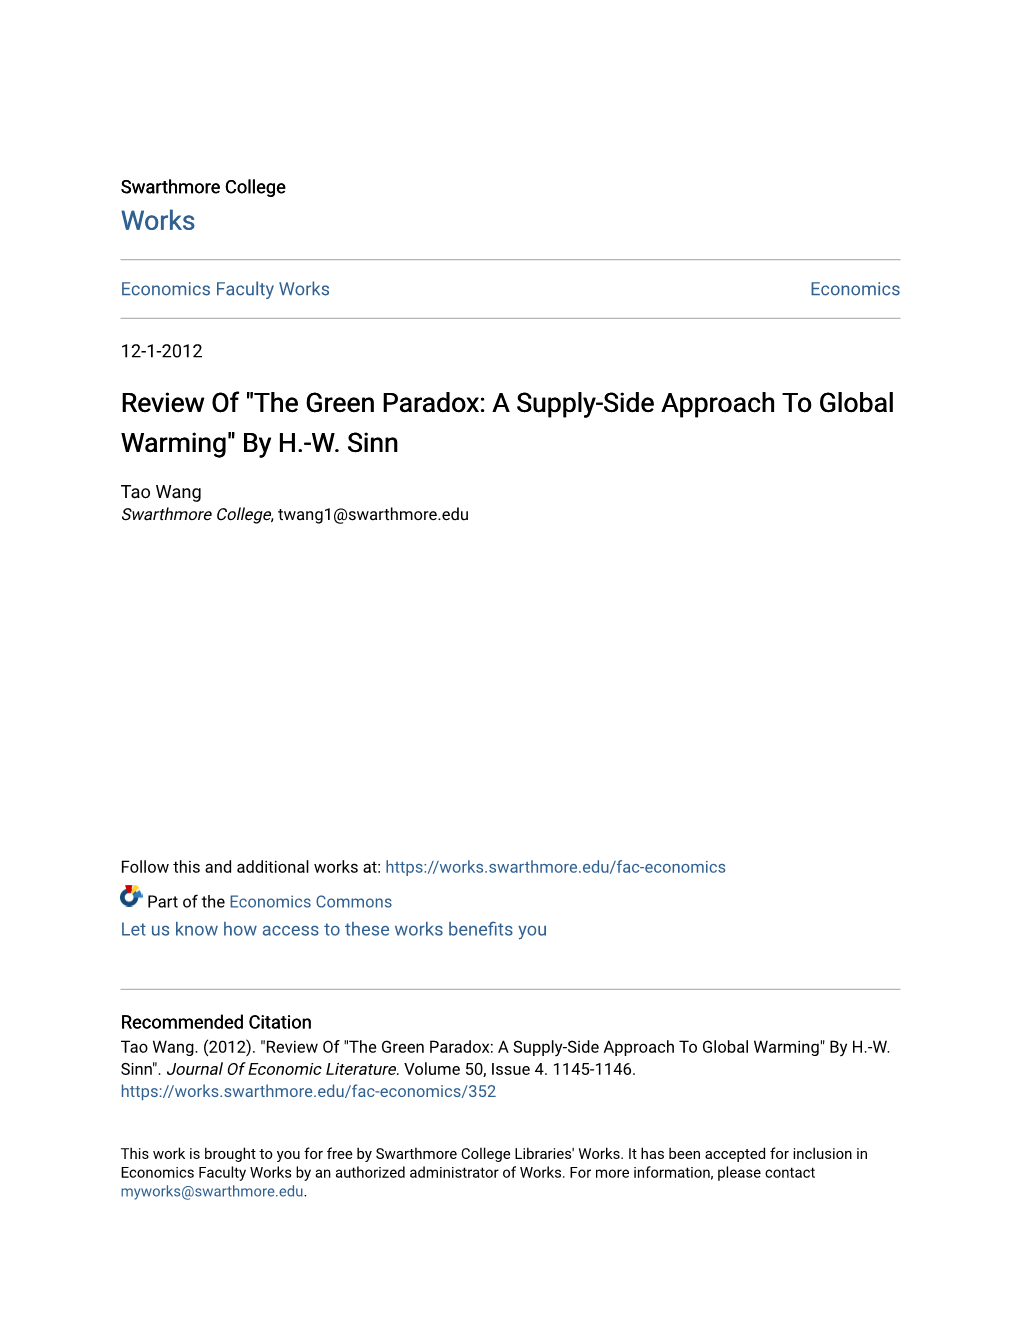 Review Of" the Green Paradox: a Supply-Side Approach to Global